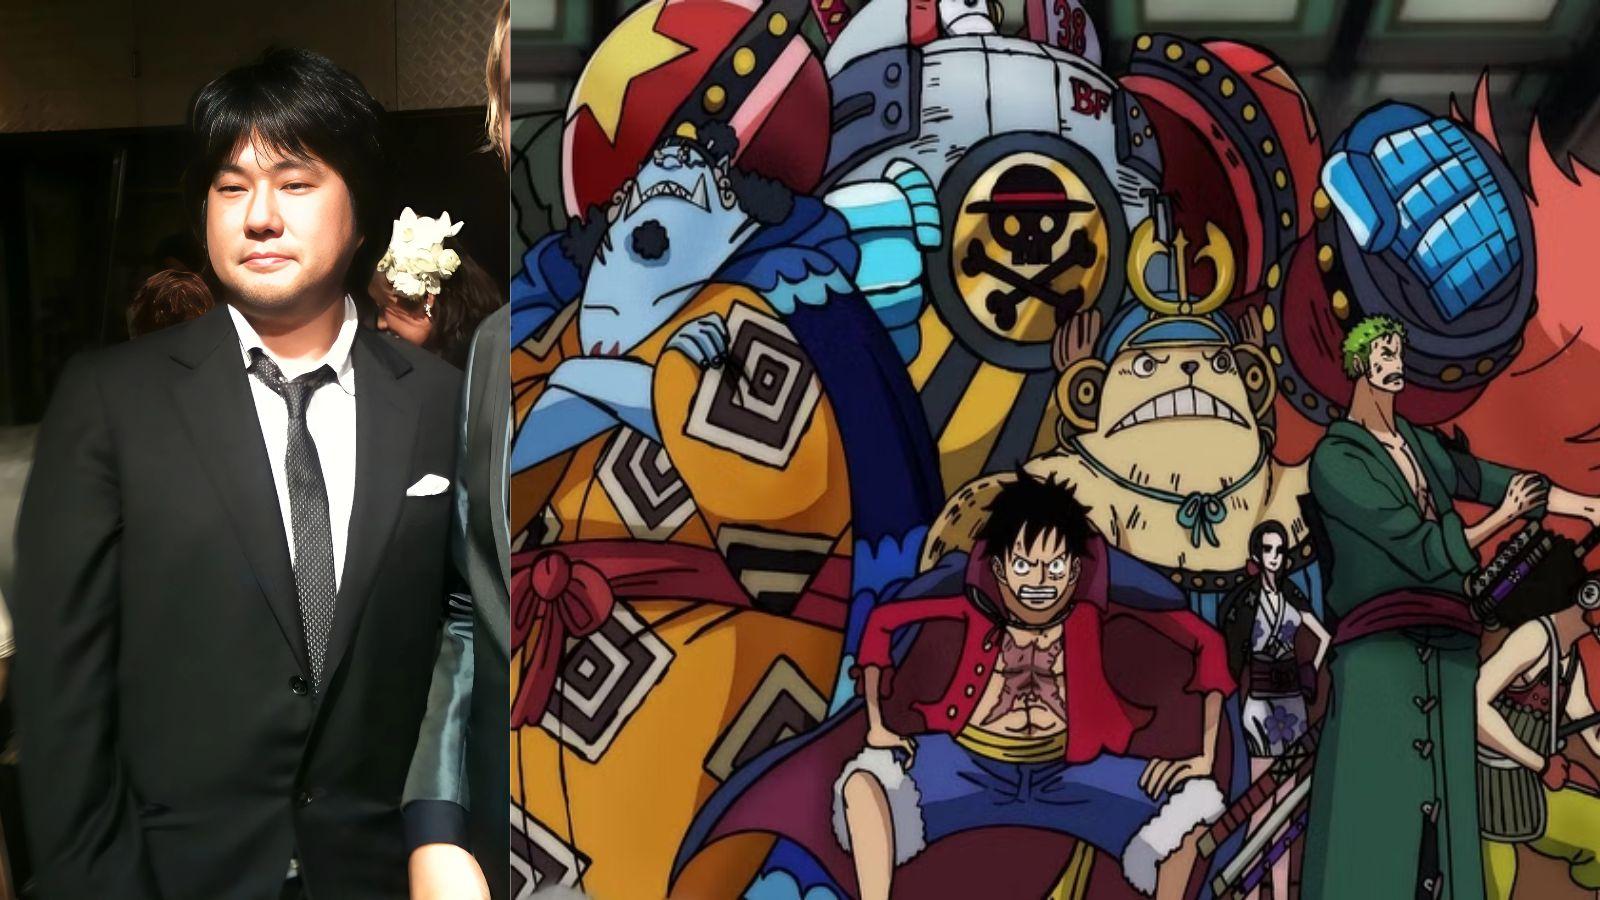 someone has to stop these one piece fans. Sanji vs queen episode